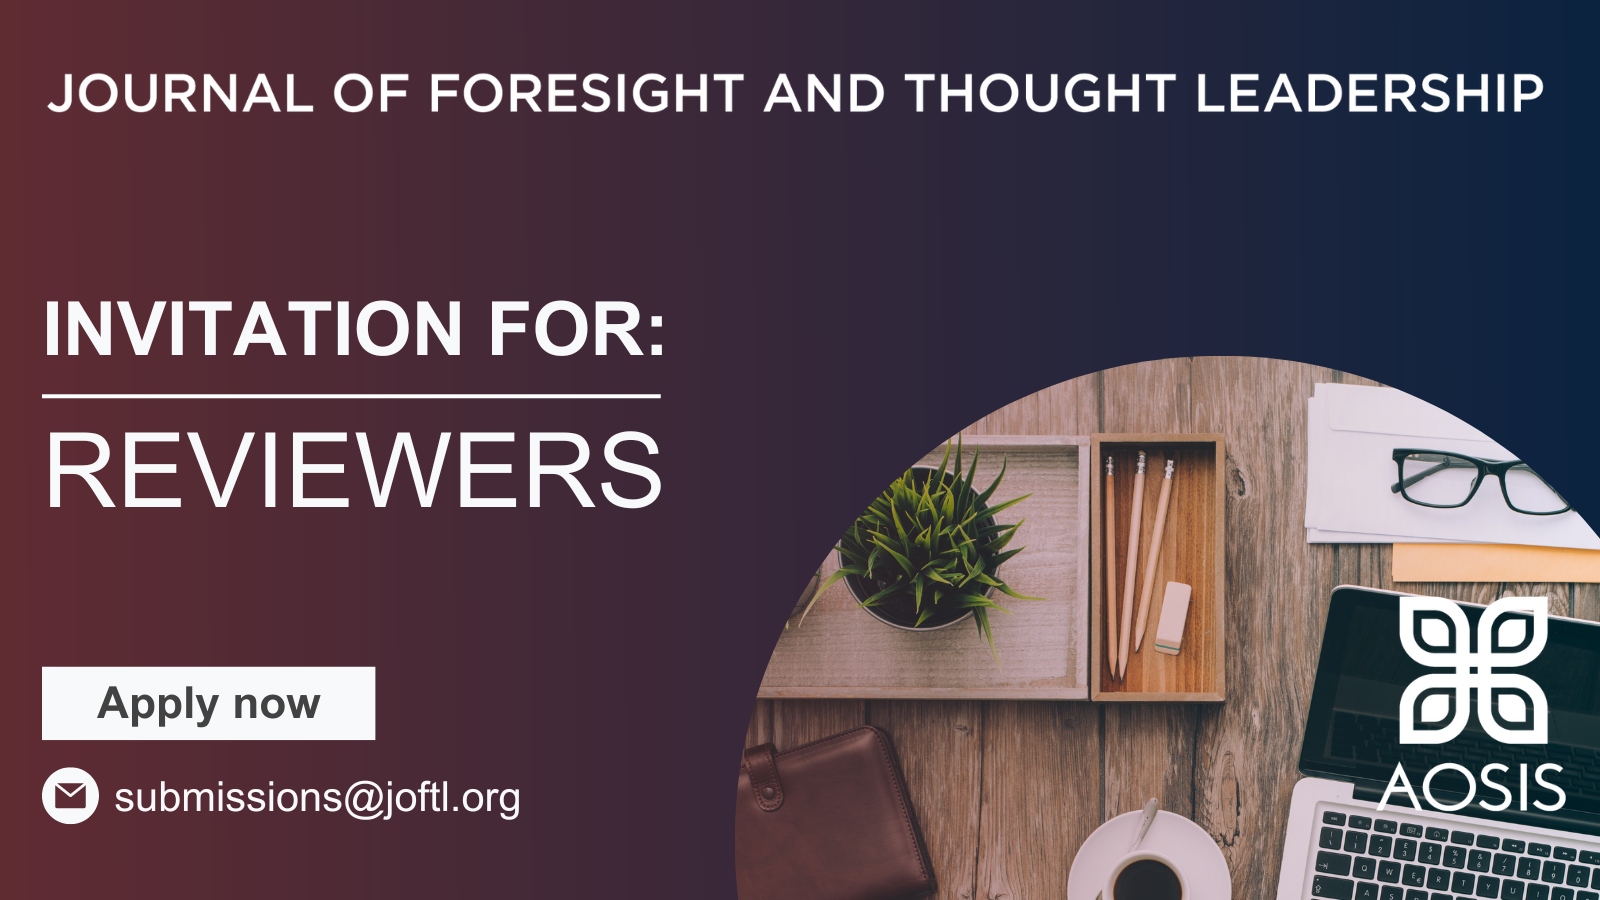 Journal of Foresight and Thought Leadership